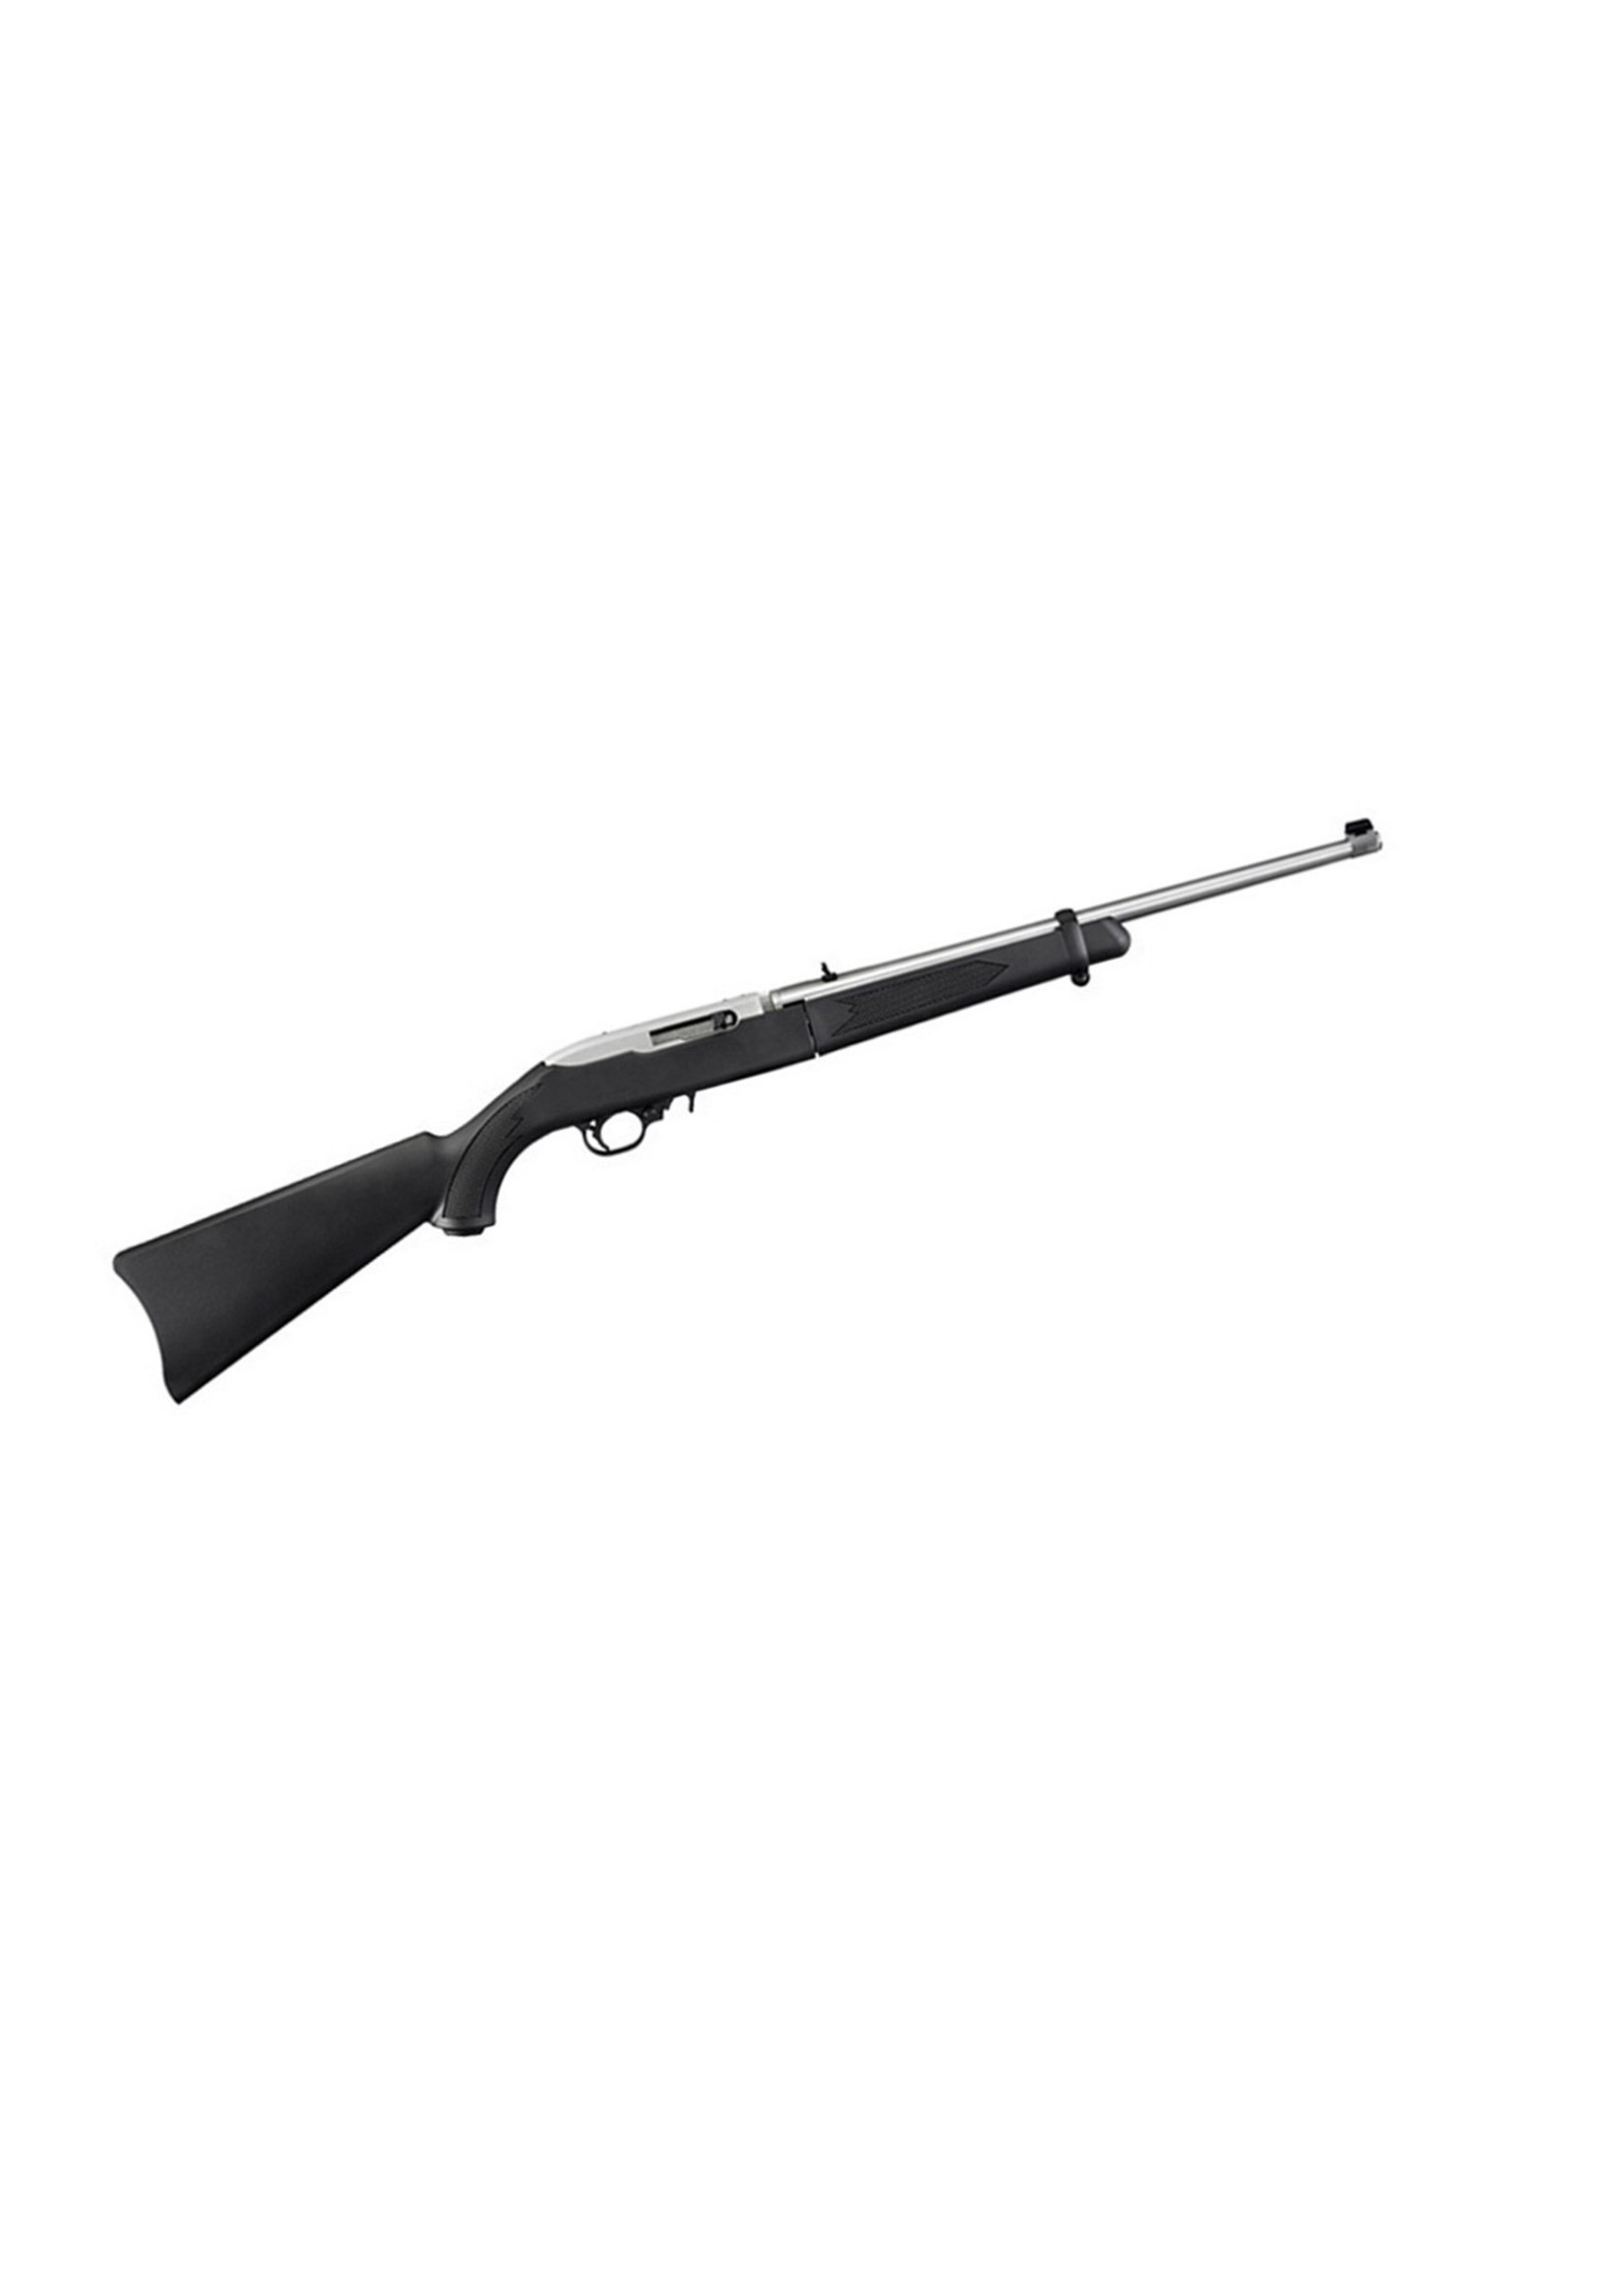 RUGER RUGER 22 LR 10/22 TAKEDOWN SEMI AUTO BLK SYN STOCK 18.5" STAINLESS STEEL BRL W/CASE